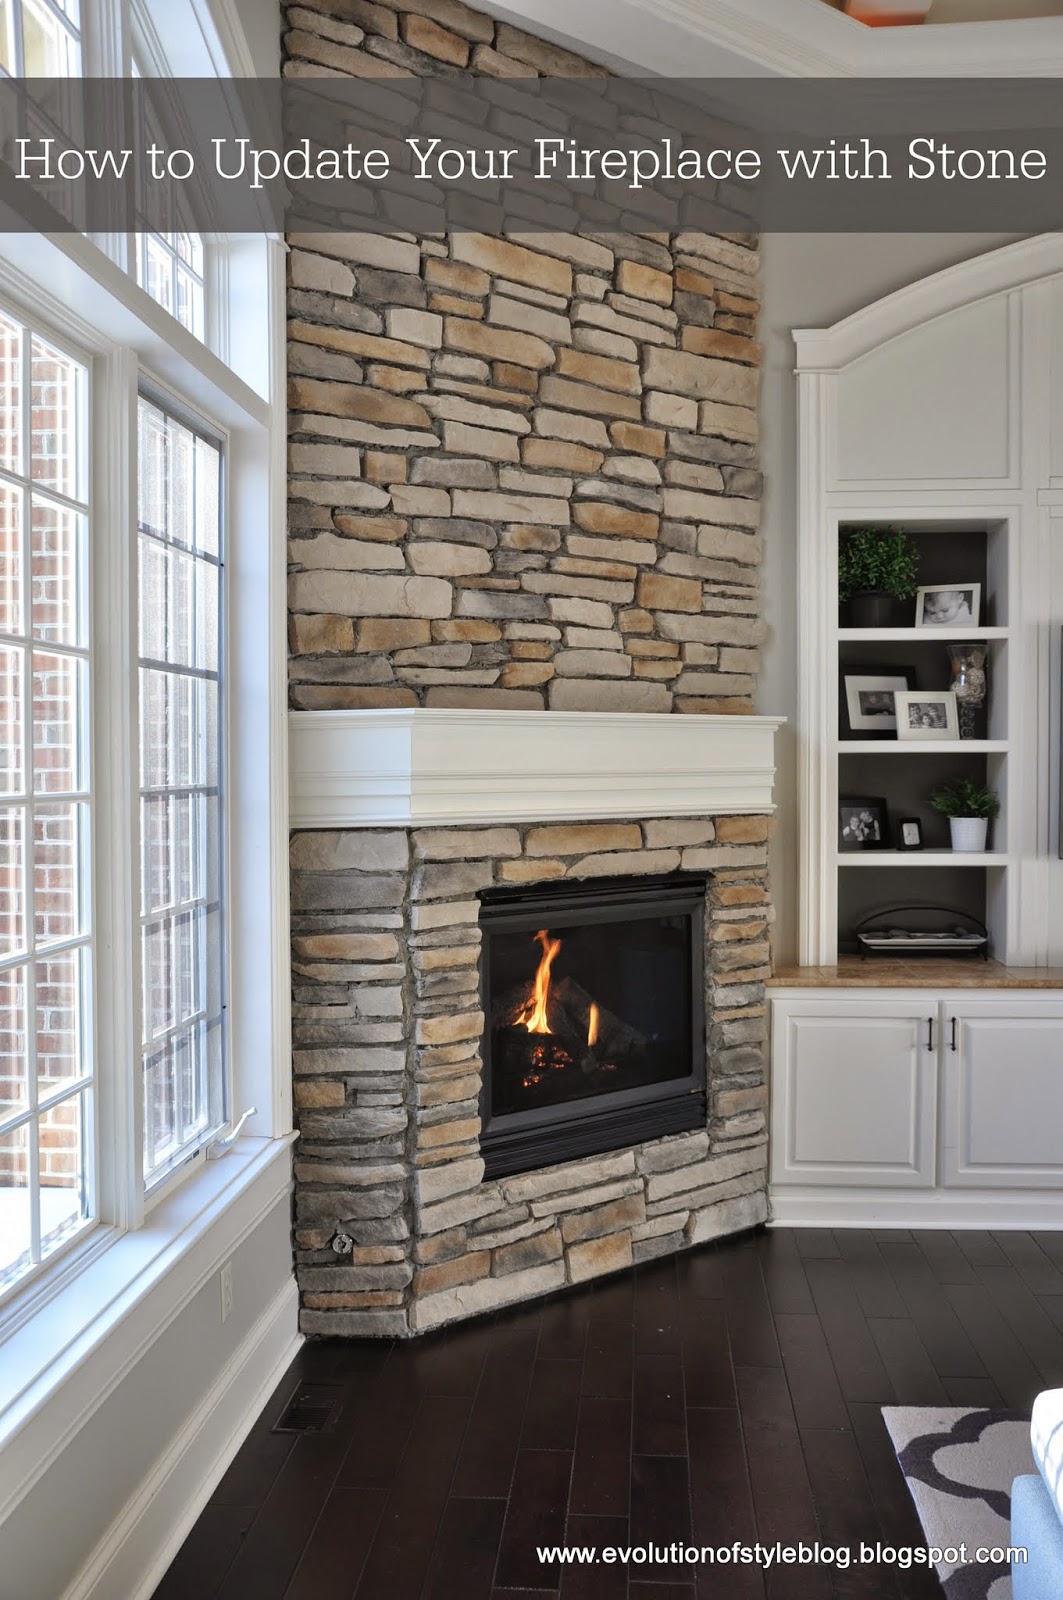 How to Put Stone Veneer On A Fireplace Beautiful How to Update Your Fireplace with Stone Evolution Of Style